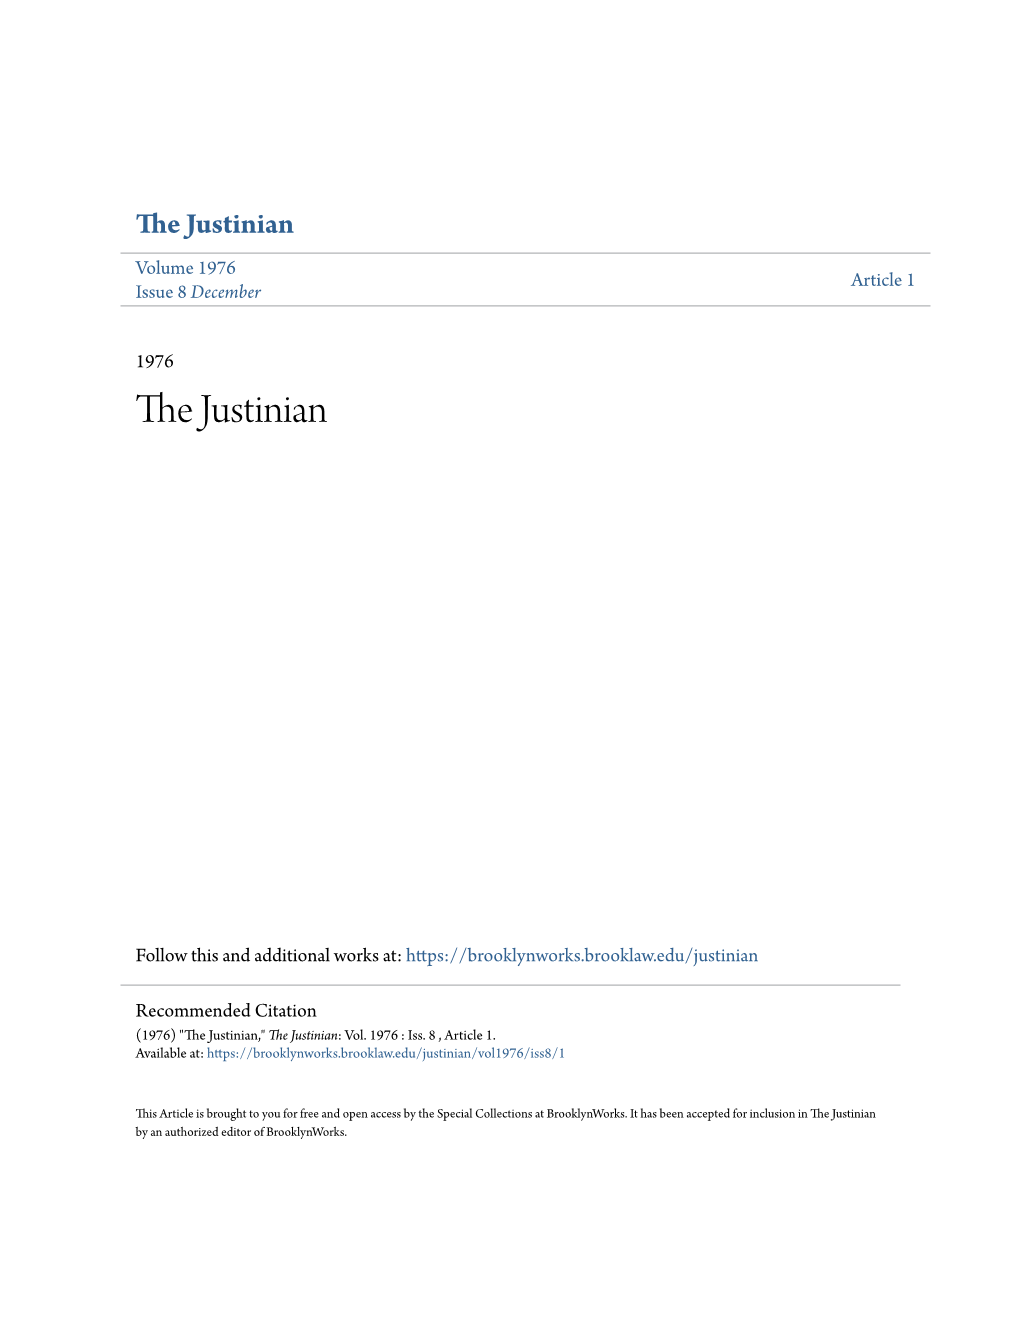 The Justinian Volume 1976 Article 1 Issue 8 December